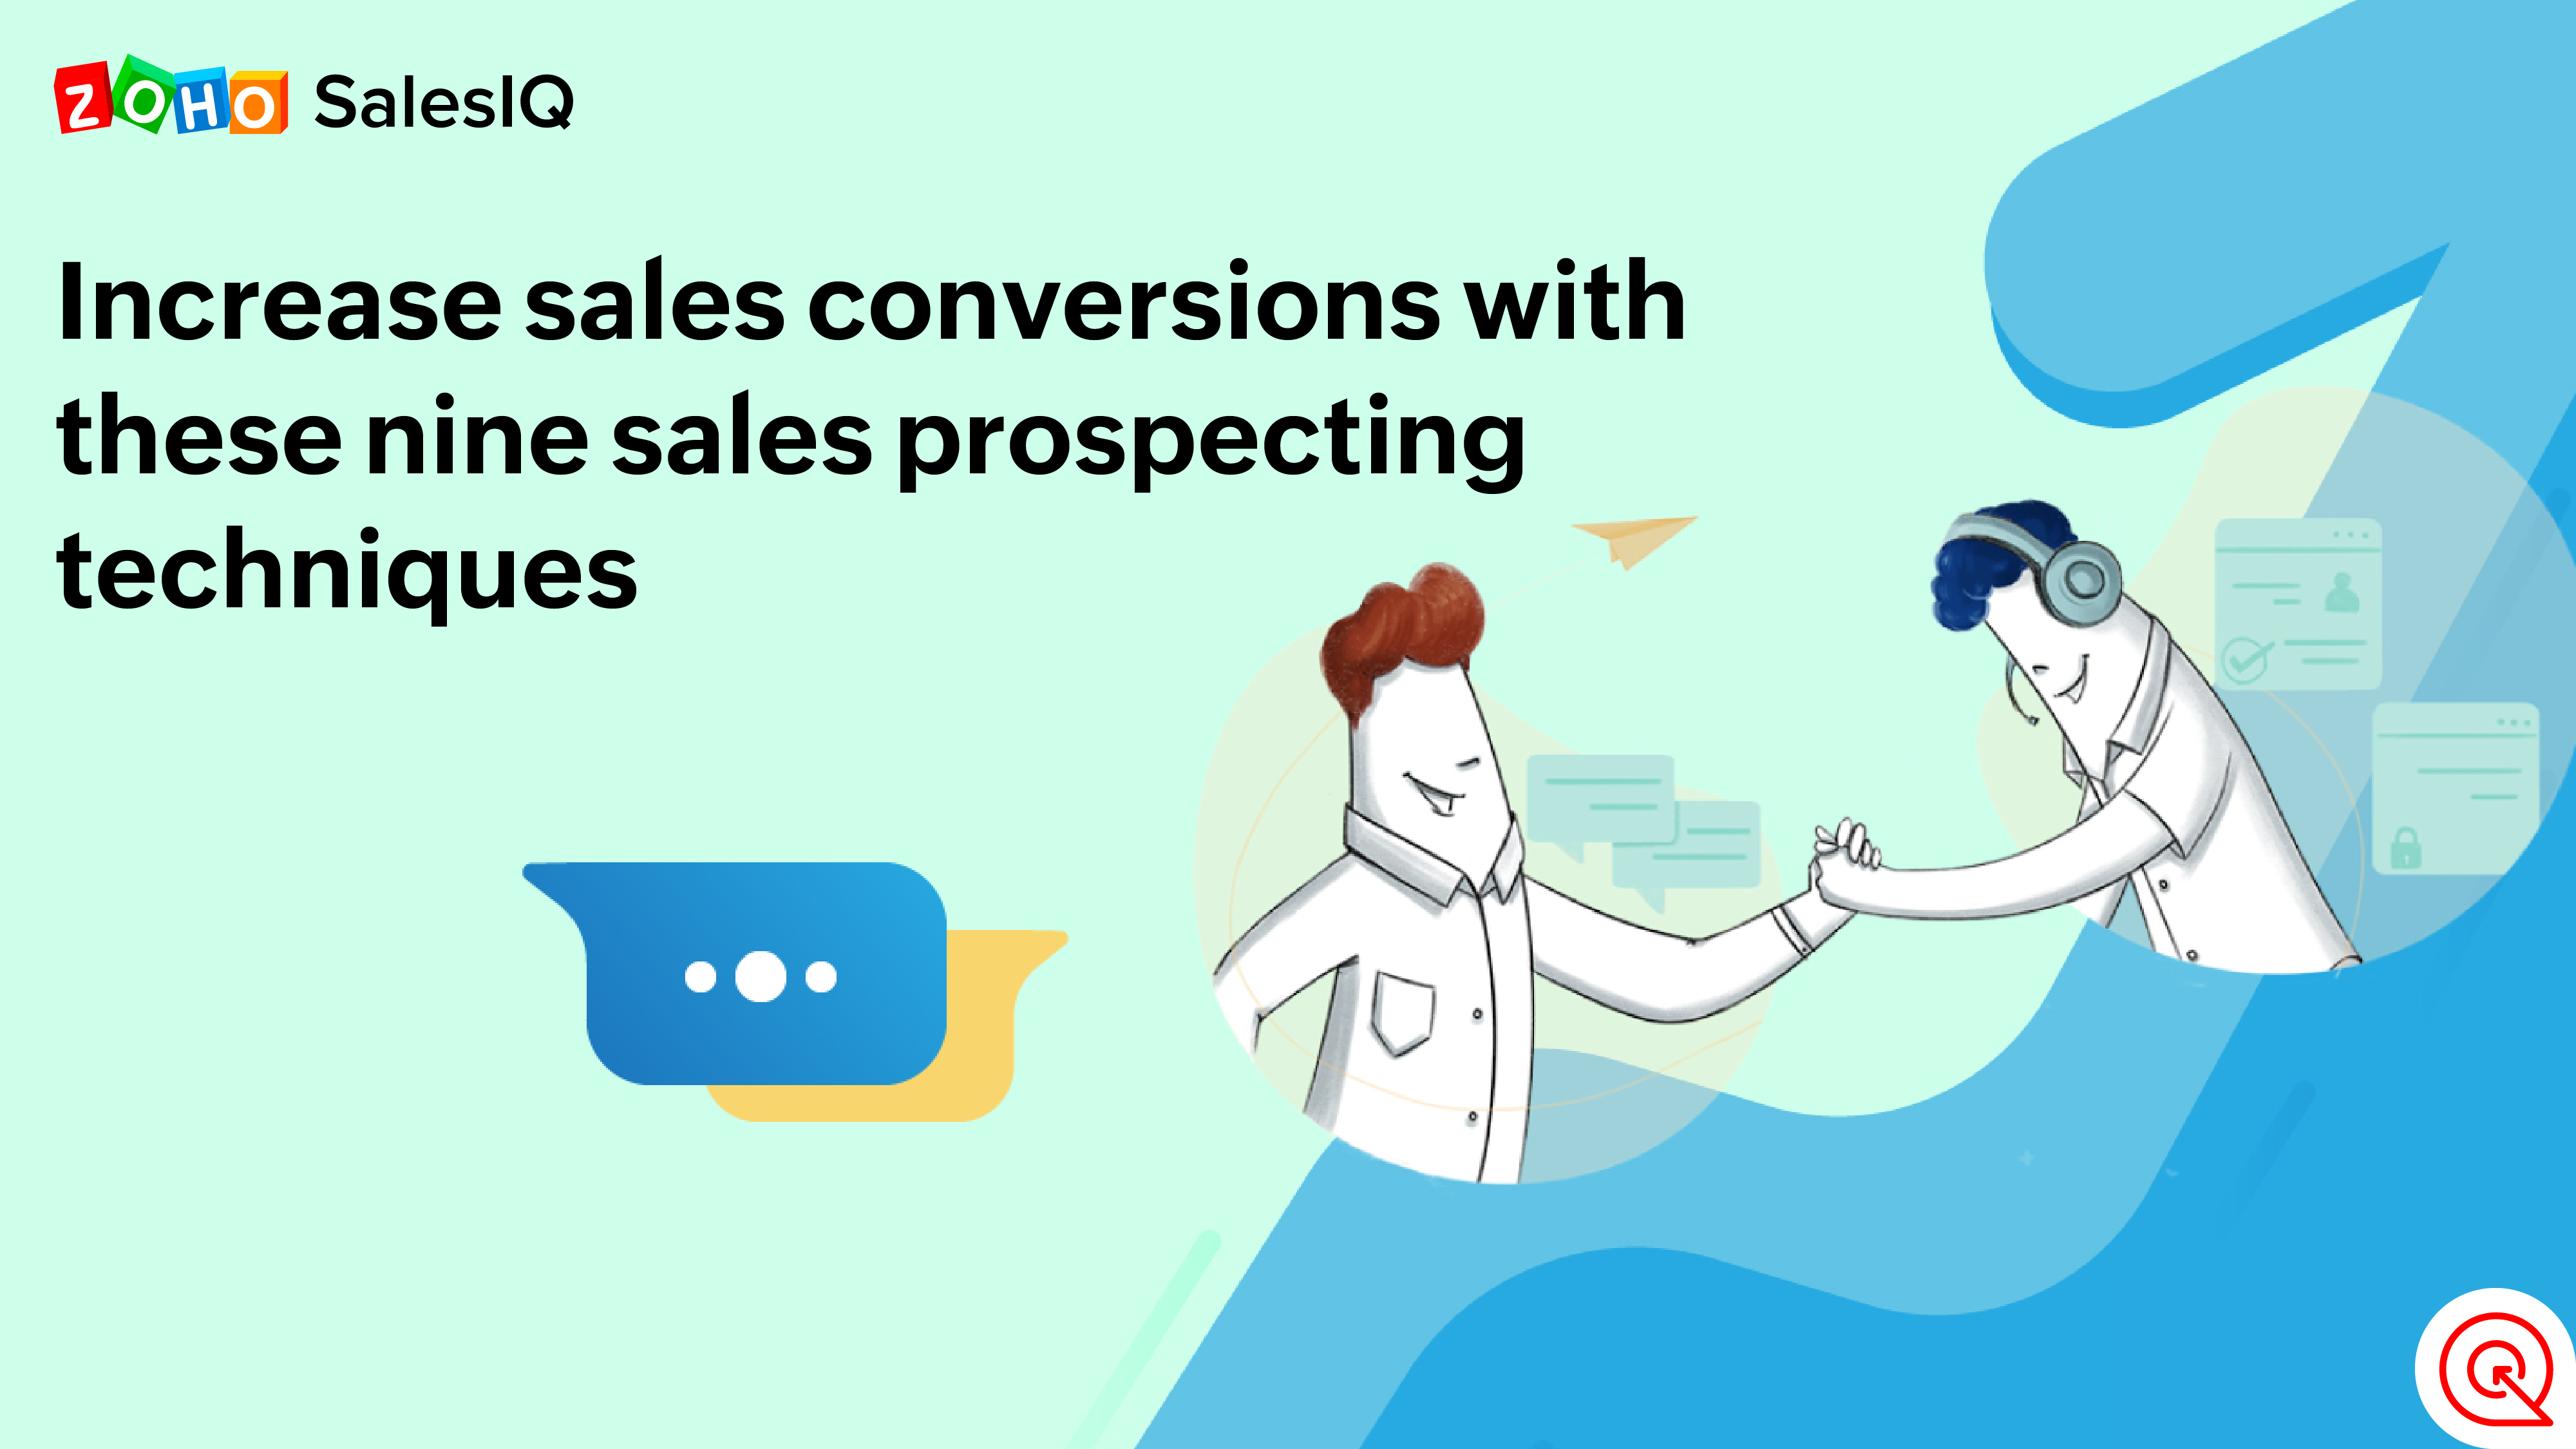 Top sales prospecting techniques to increase sales conversion